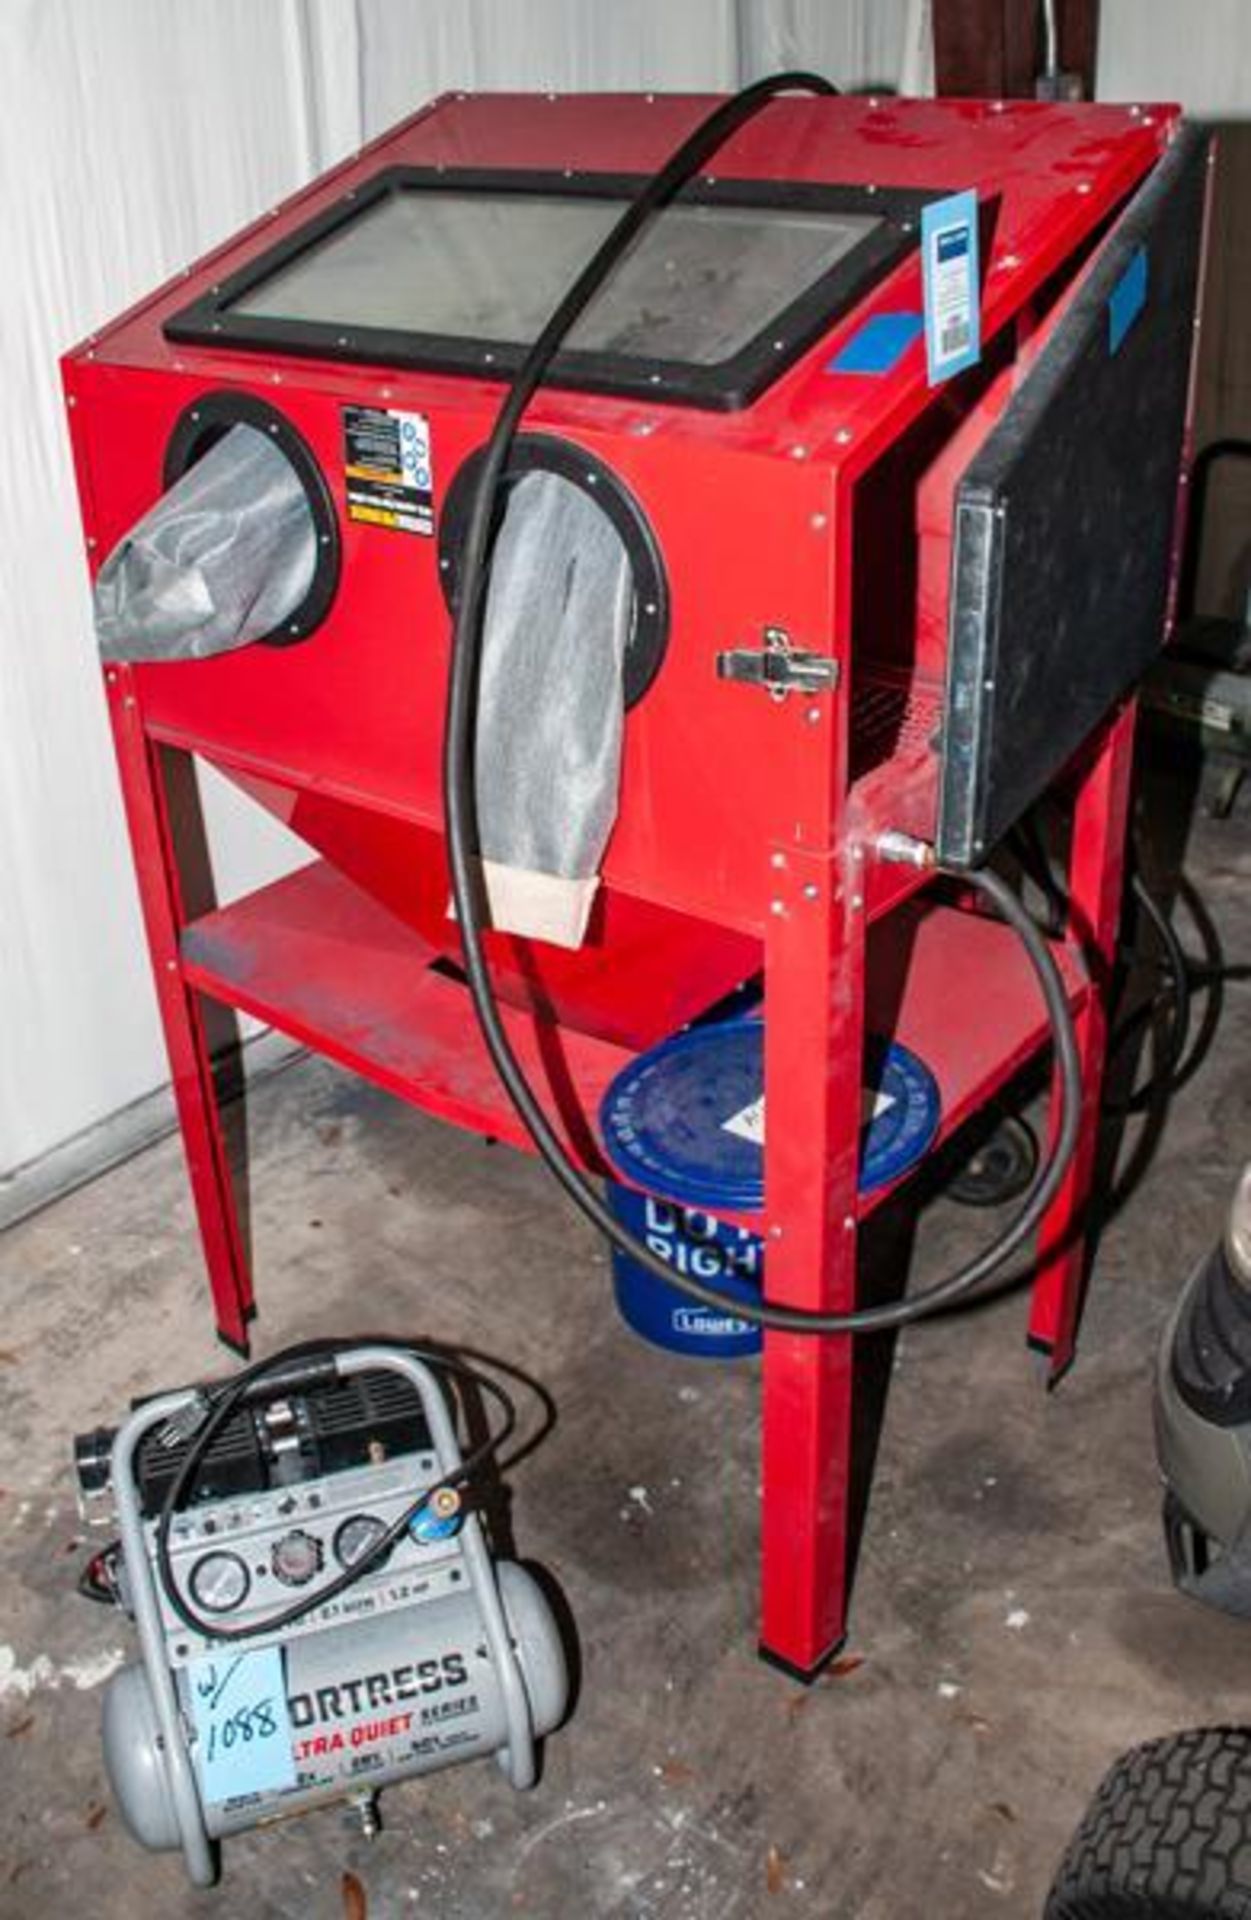 Central pneumatic abrasive blast cabinet on stand, 40 lb cap. & Fortress 1.2hp, 2gal. Air compressor